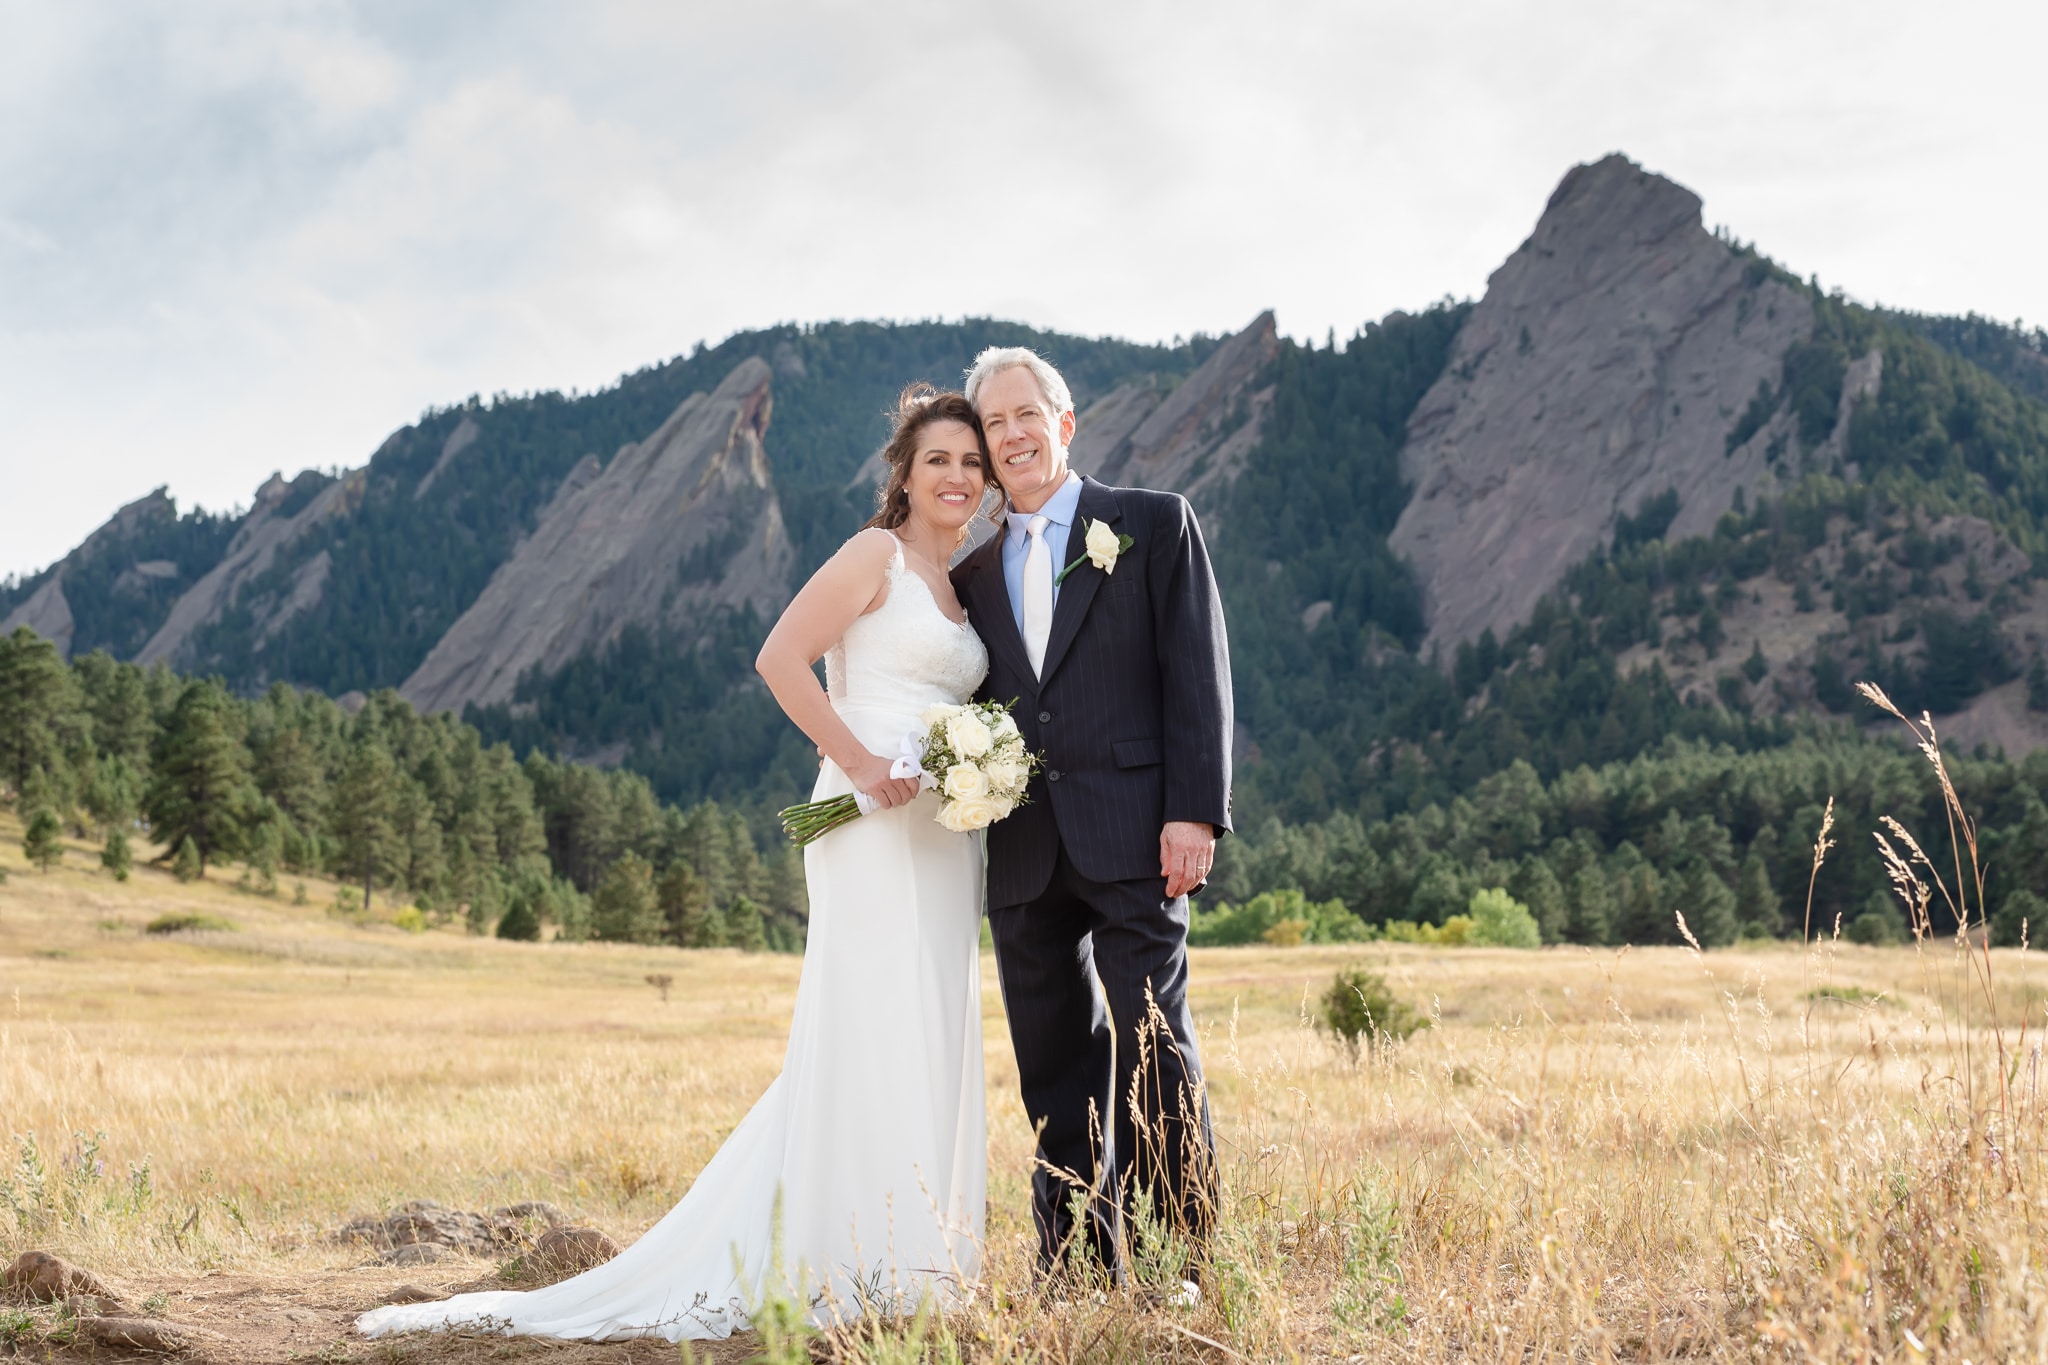 Older wedding couple standing in front of the FlatIrons after their wedding at Chautauqua Park, Boulder.